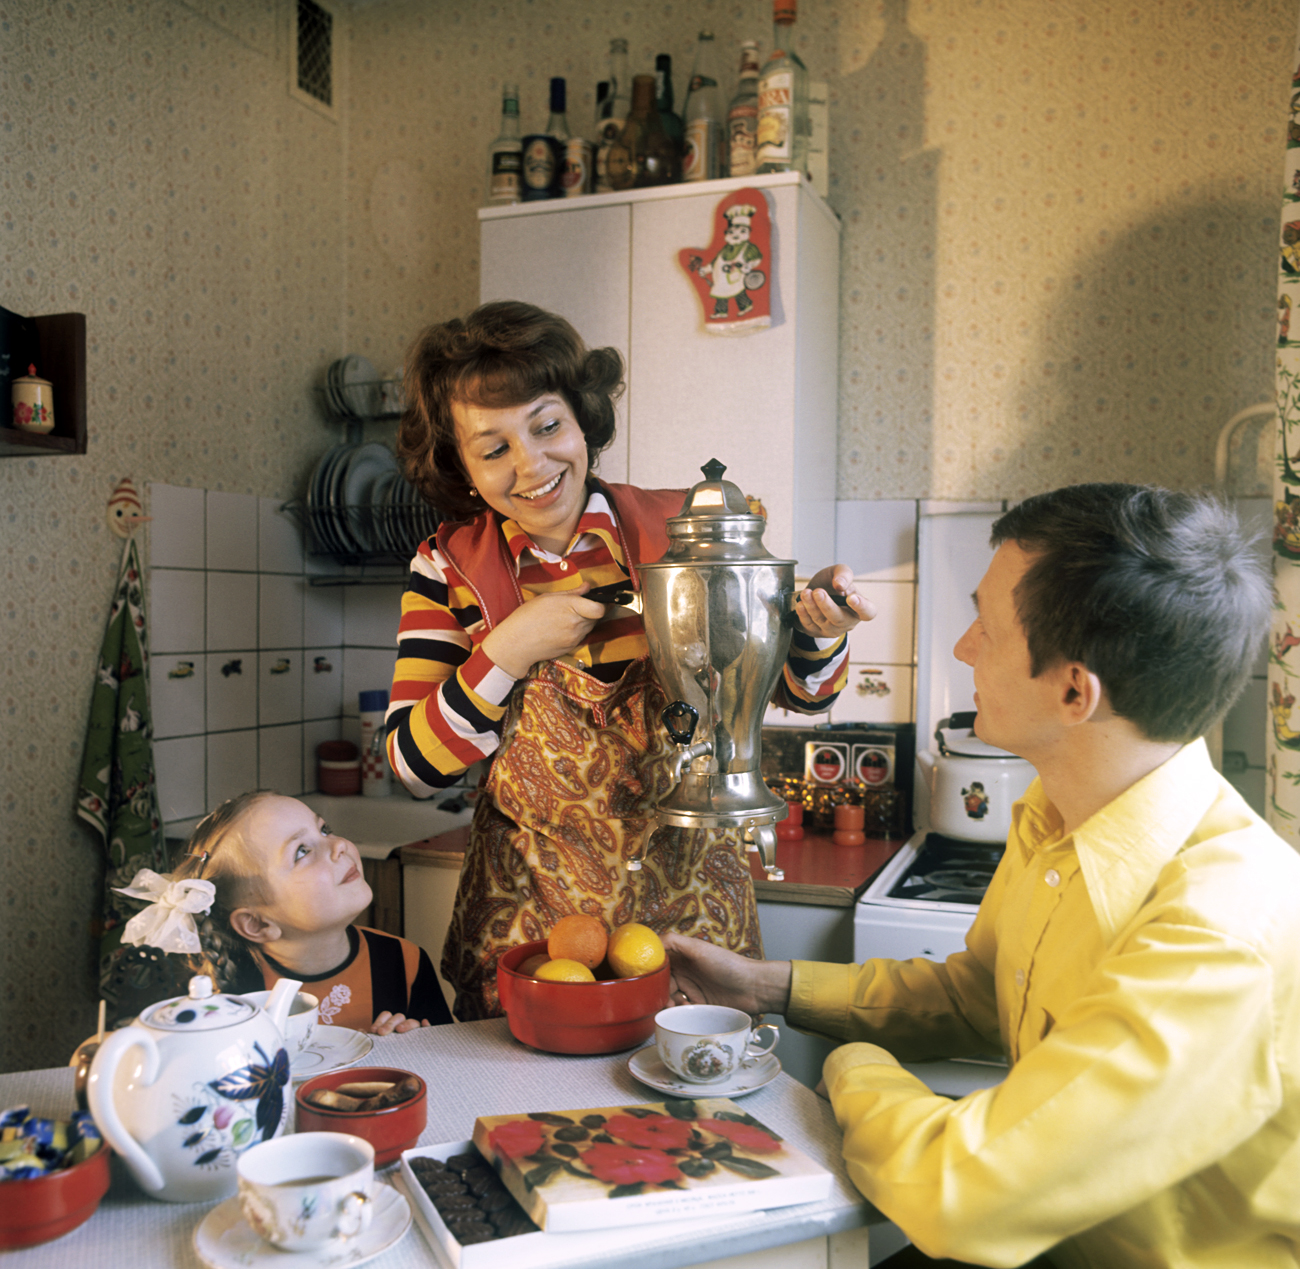 Soviet kitchen gadgets. (Vladimir Drozdov, service engineer at the 1st Moscow cotton-printing mill, at home with his wife Marina and daughter Anya.) 